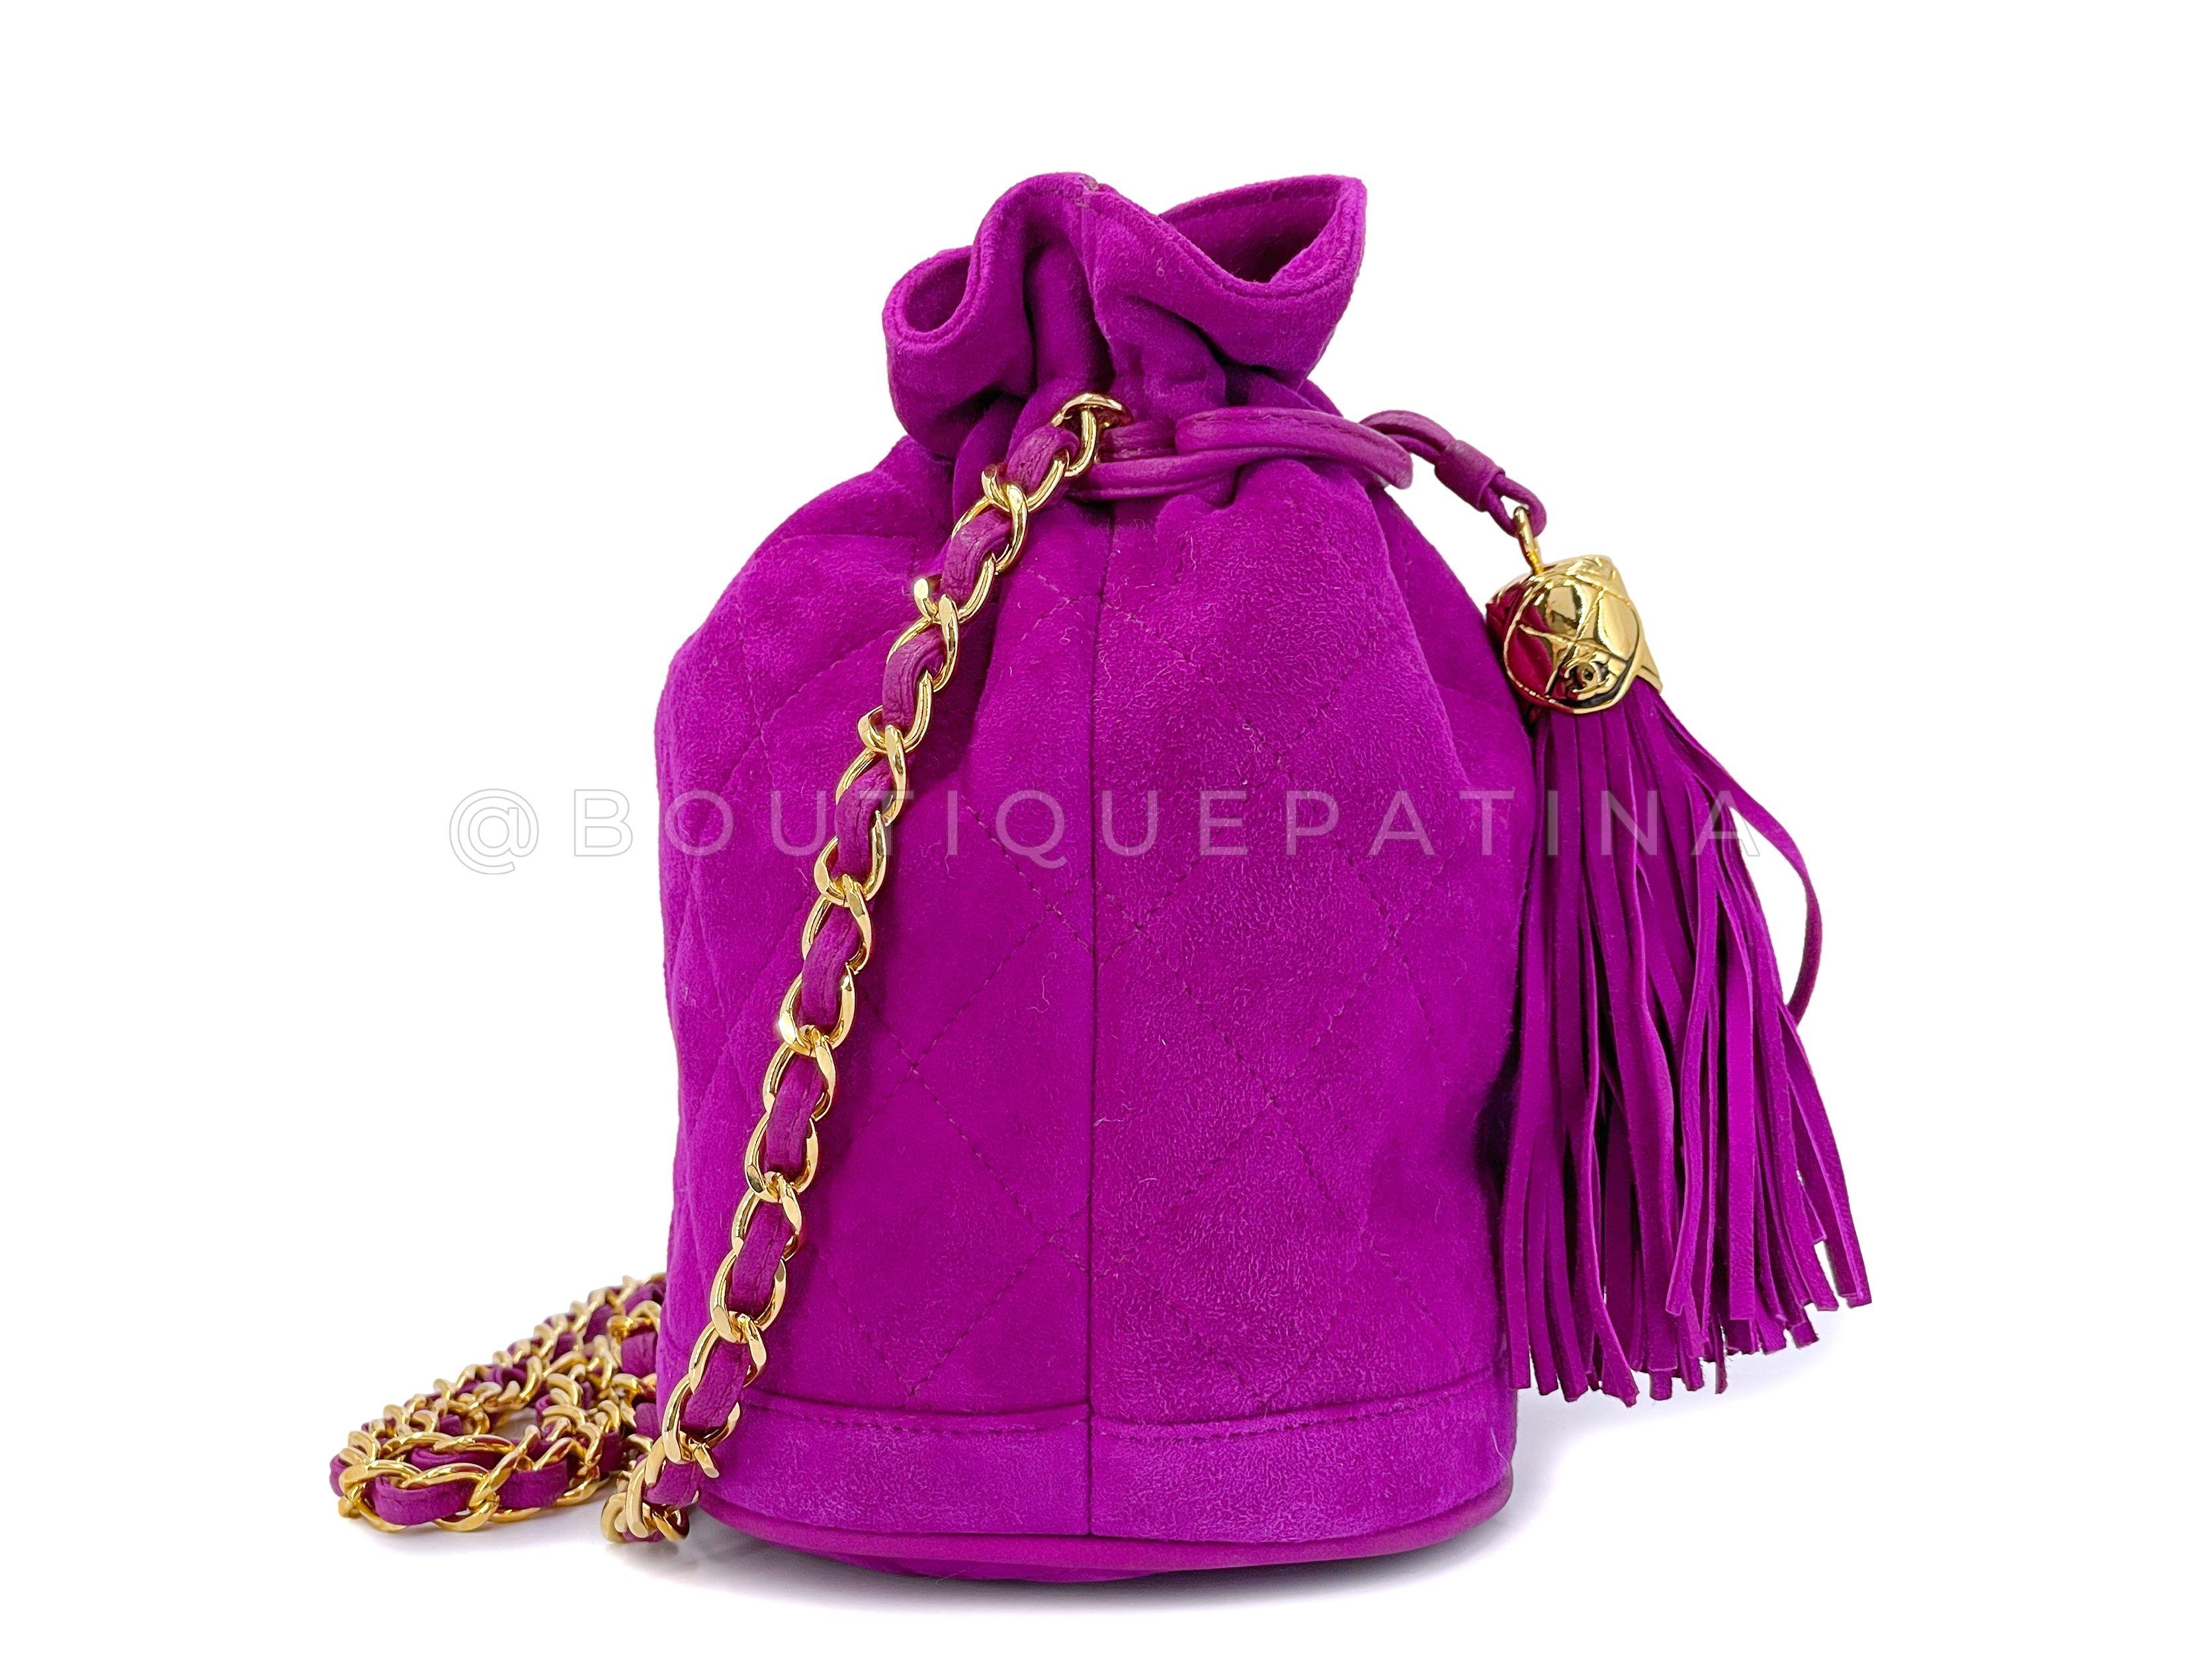 Rare Chanel 1990 Pink-Purple Suede Mini Drawstring Bucket Bag 24k GHW 67450 In Excellent Condition For Sale In Costa Mesa, CA